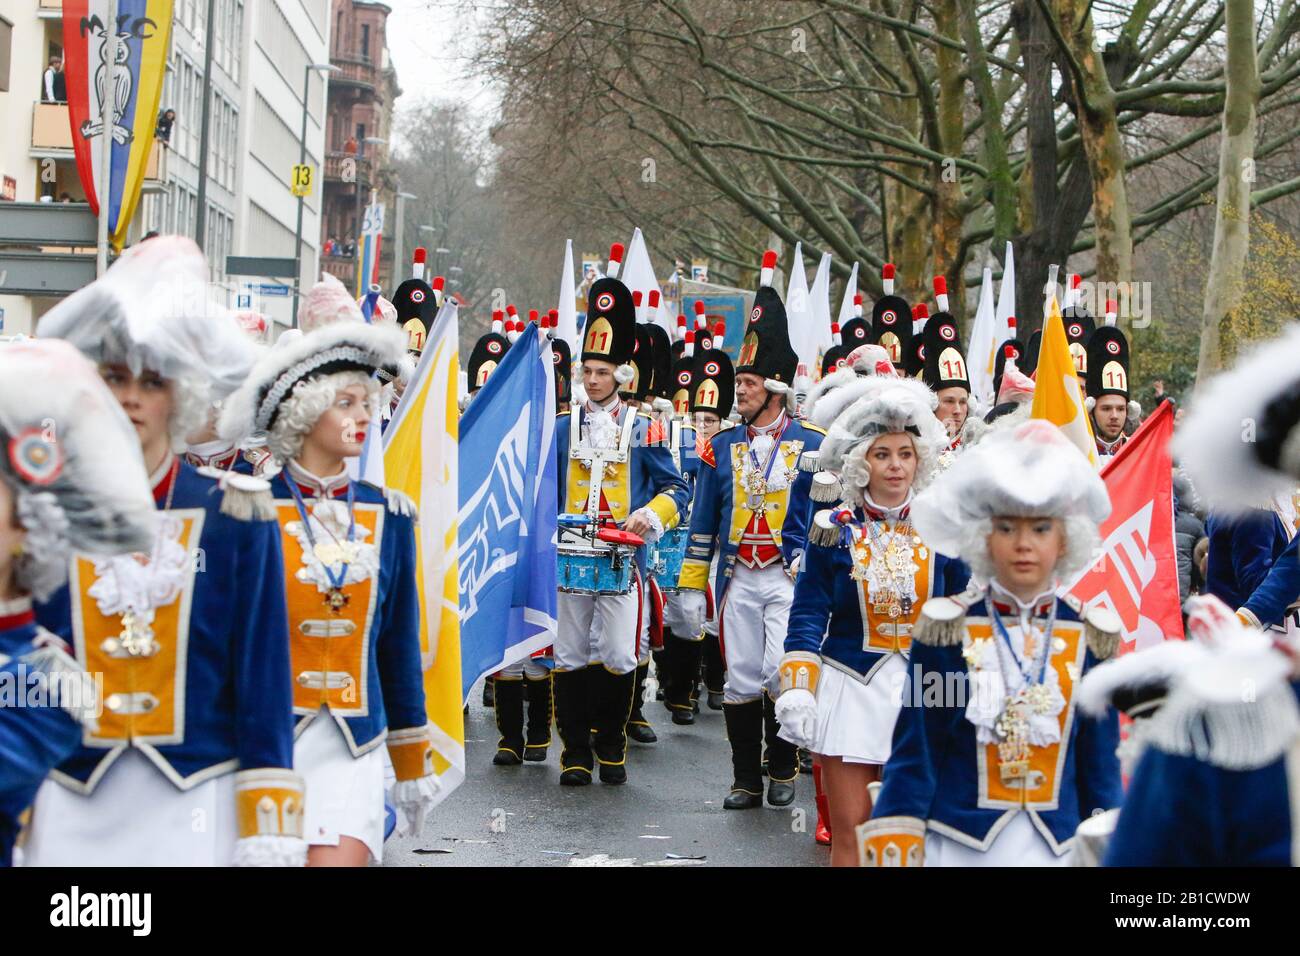 Mainz, Germany. 24th February 2020. Members of the Mainzer Fuesilier-Garde 1953 take part in the the Mainz Rose Monday parade. Around half a million people lined the streets of Mainz for the traditional Rose Monday Carnival Parade. The 9 km long parade with over 9,000 participants is one of the three large Rose Monday Parades in Germany. Stock Photo